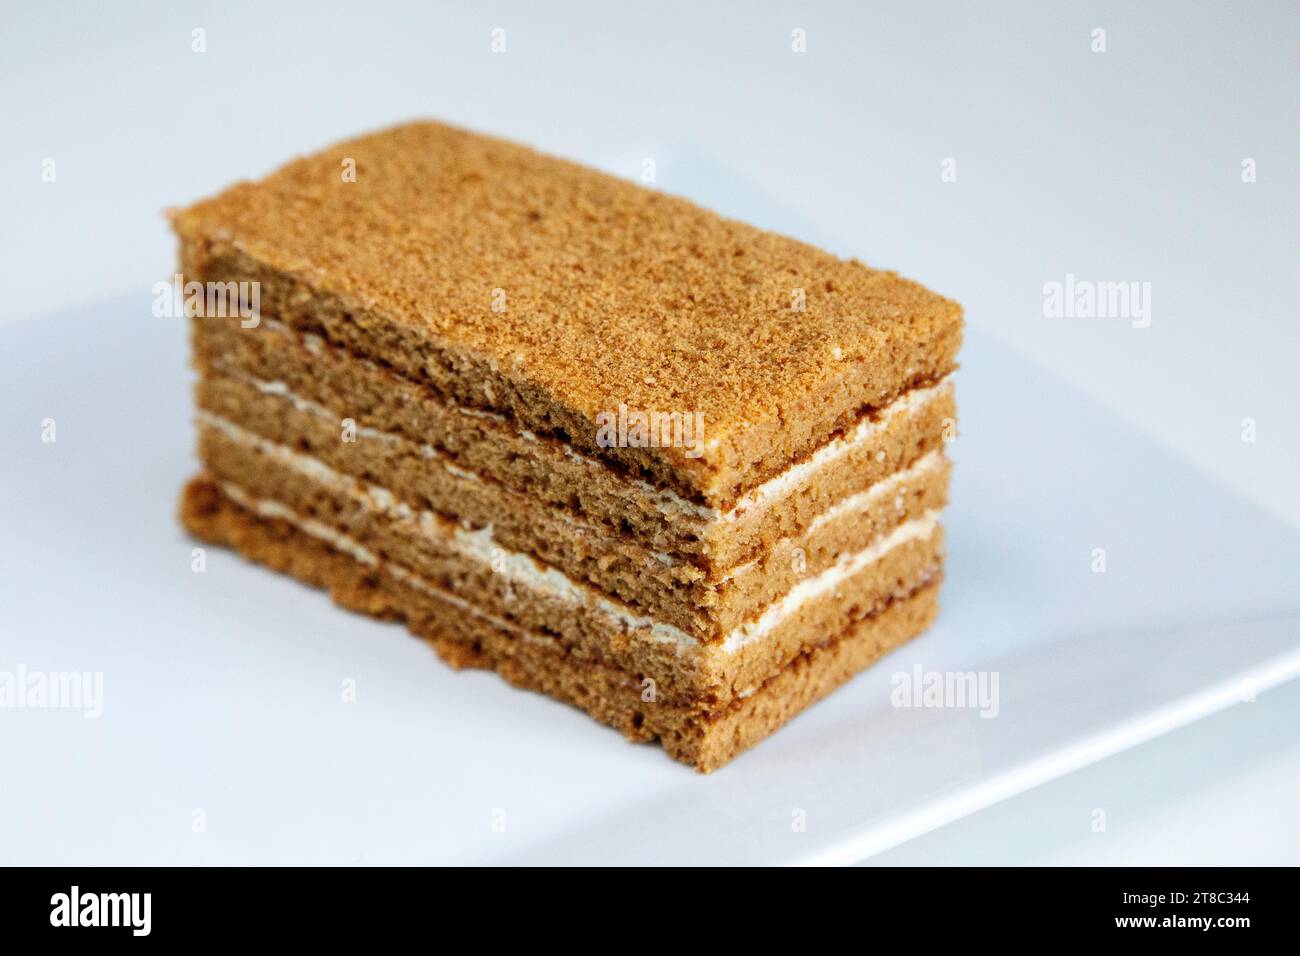 A slice of Russian honey cake (medovik) on a white plate Stock Photo